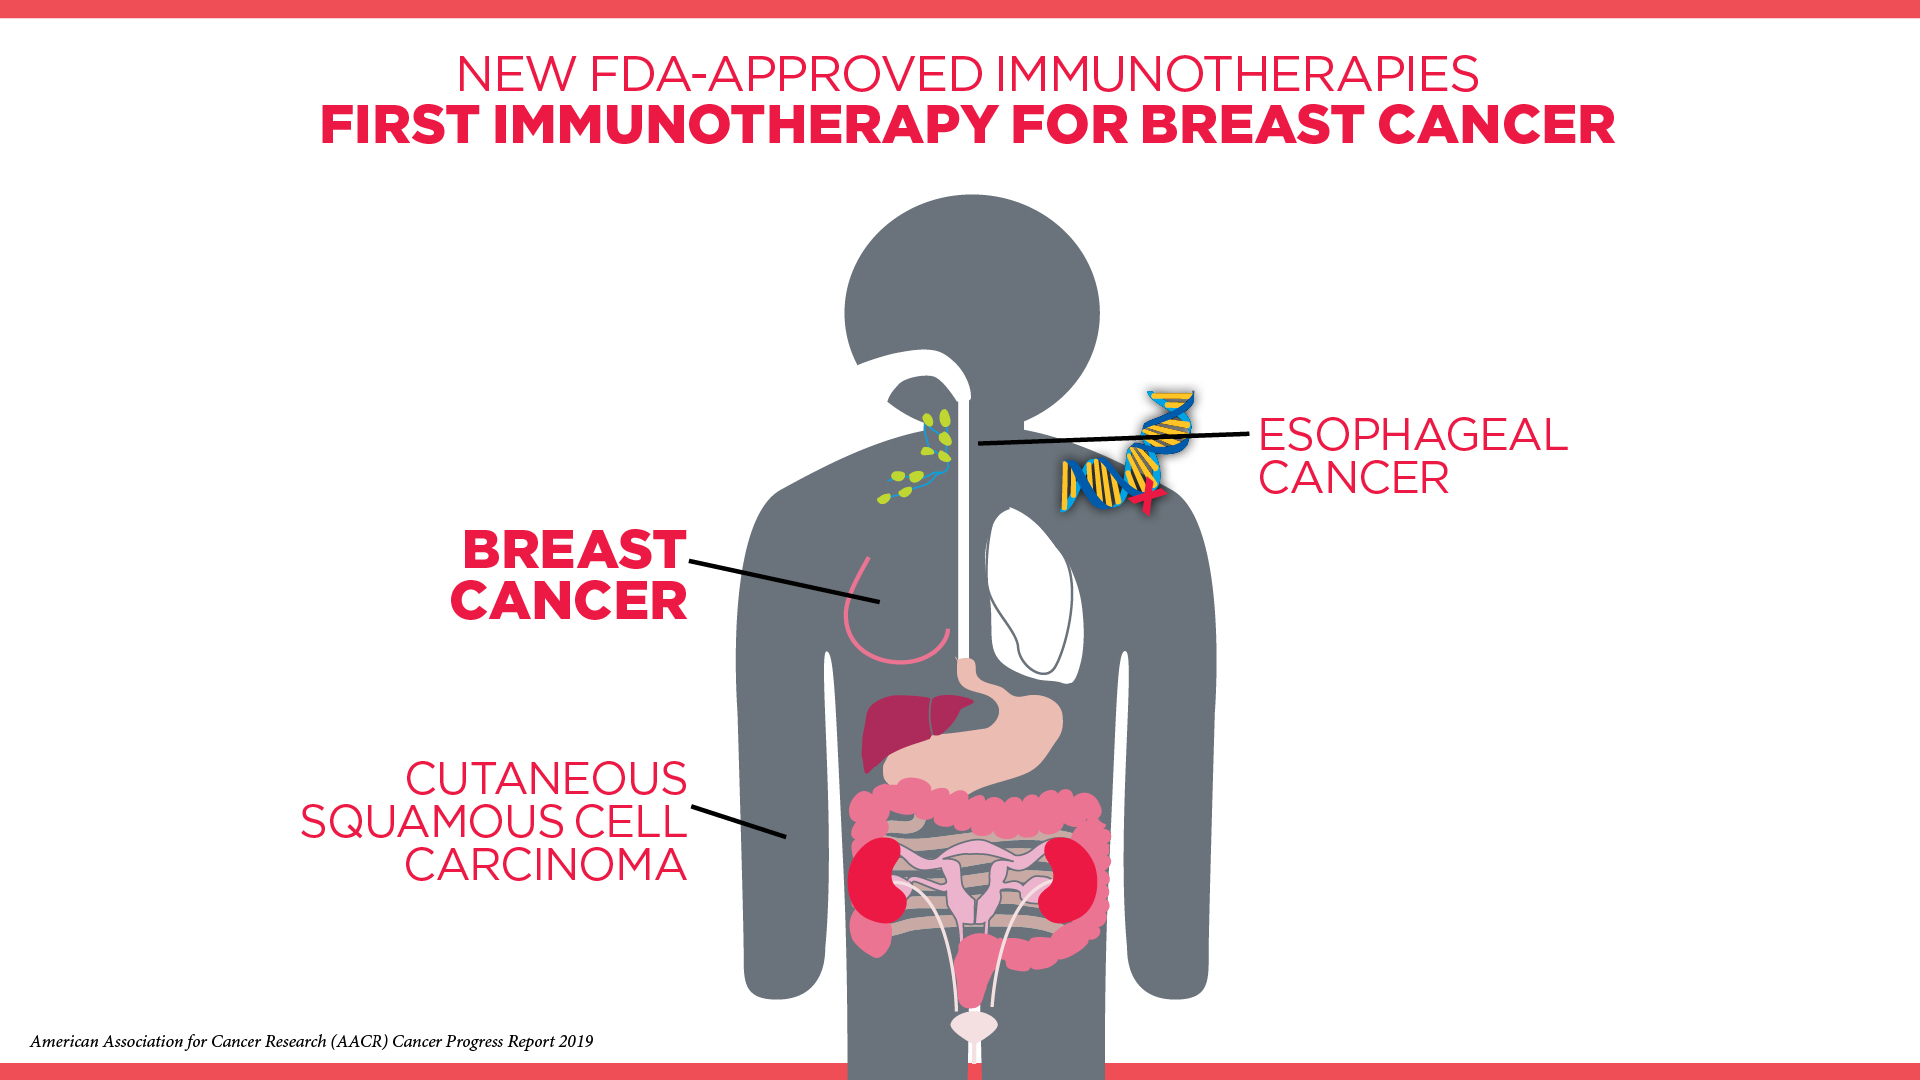 This year, the FDA approved the first immunotherapy to treat breast cancer